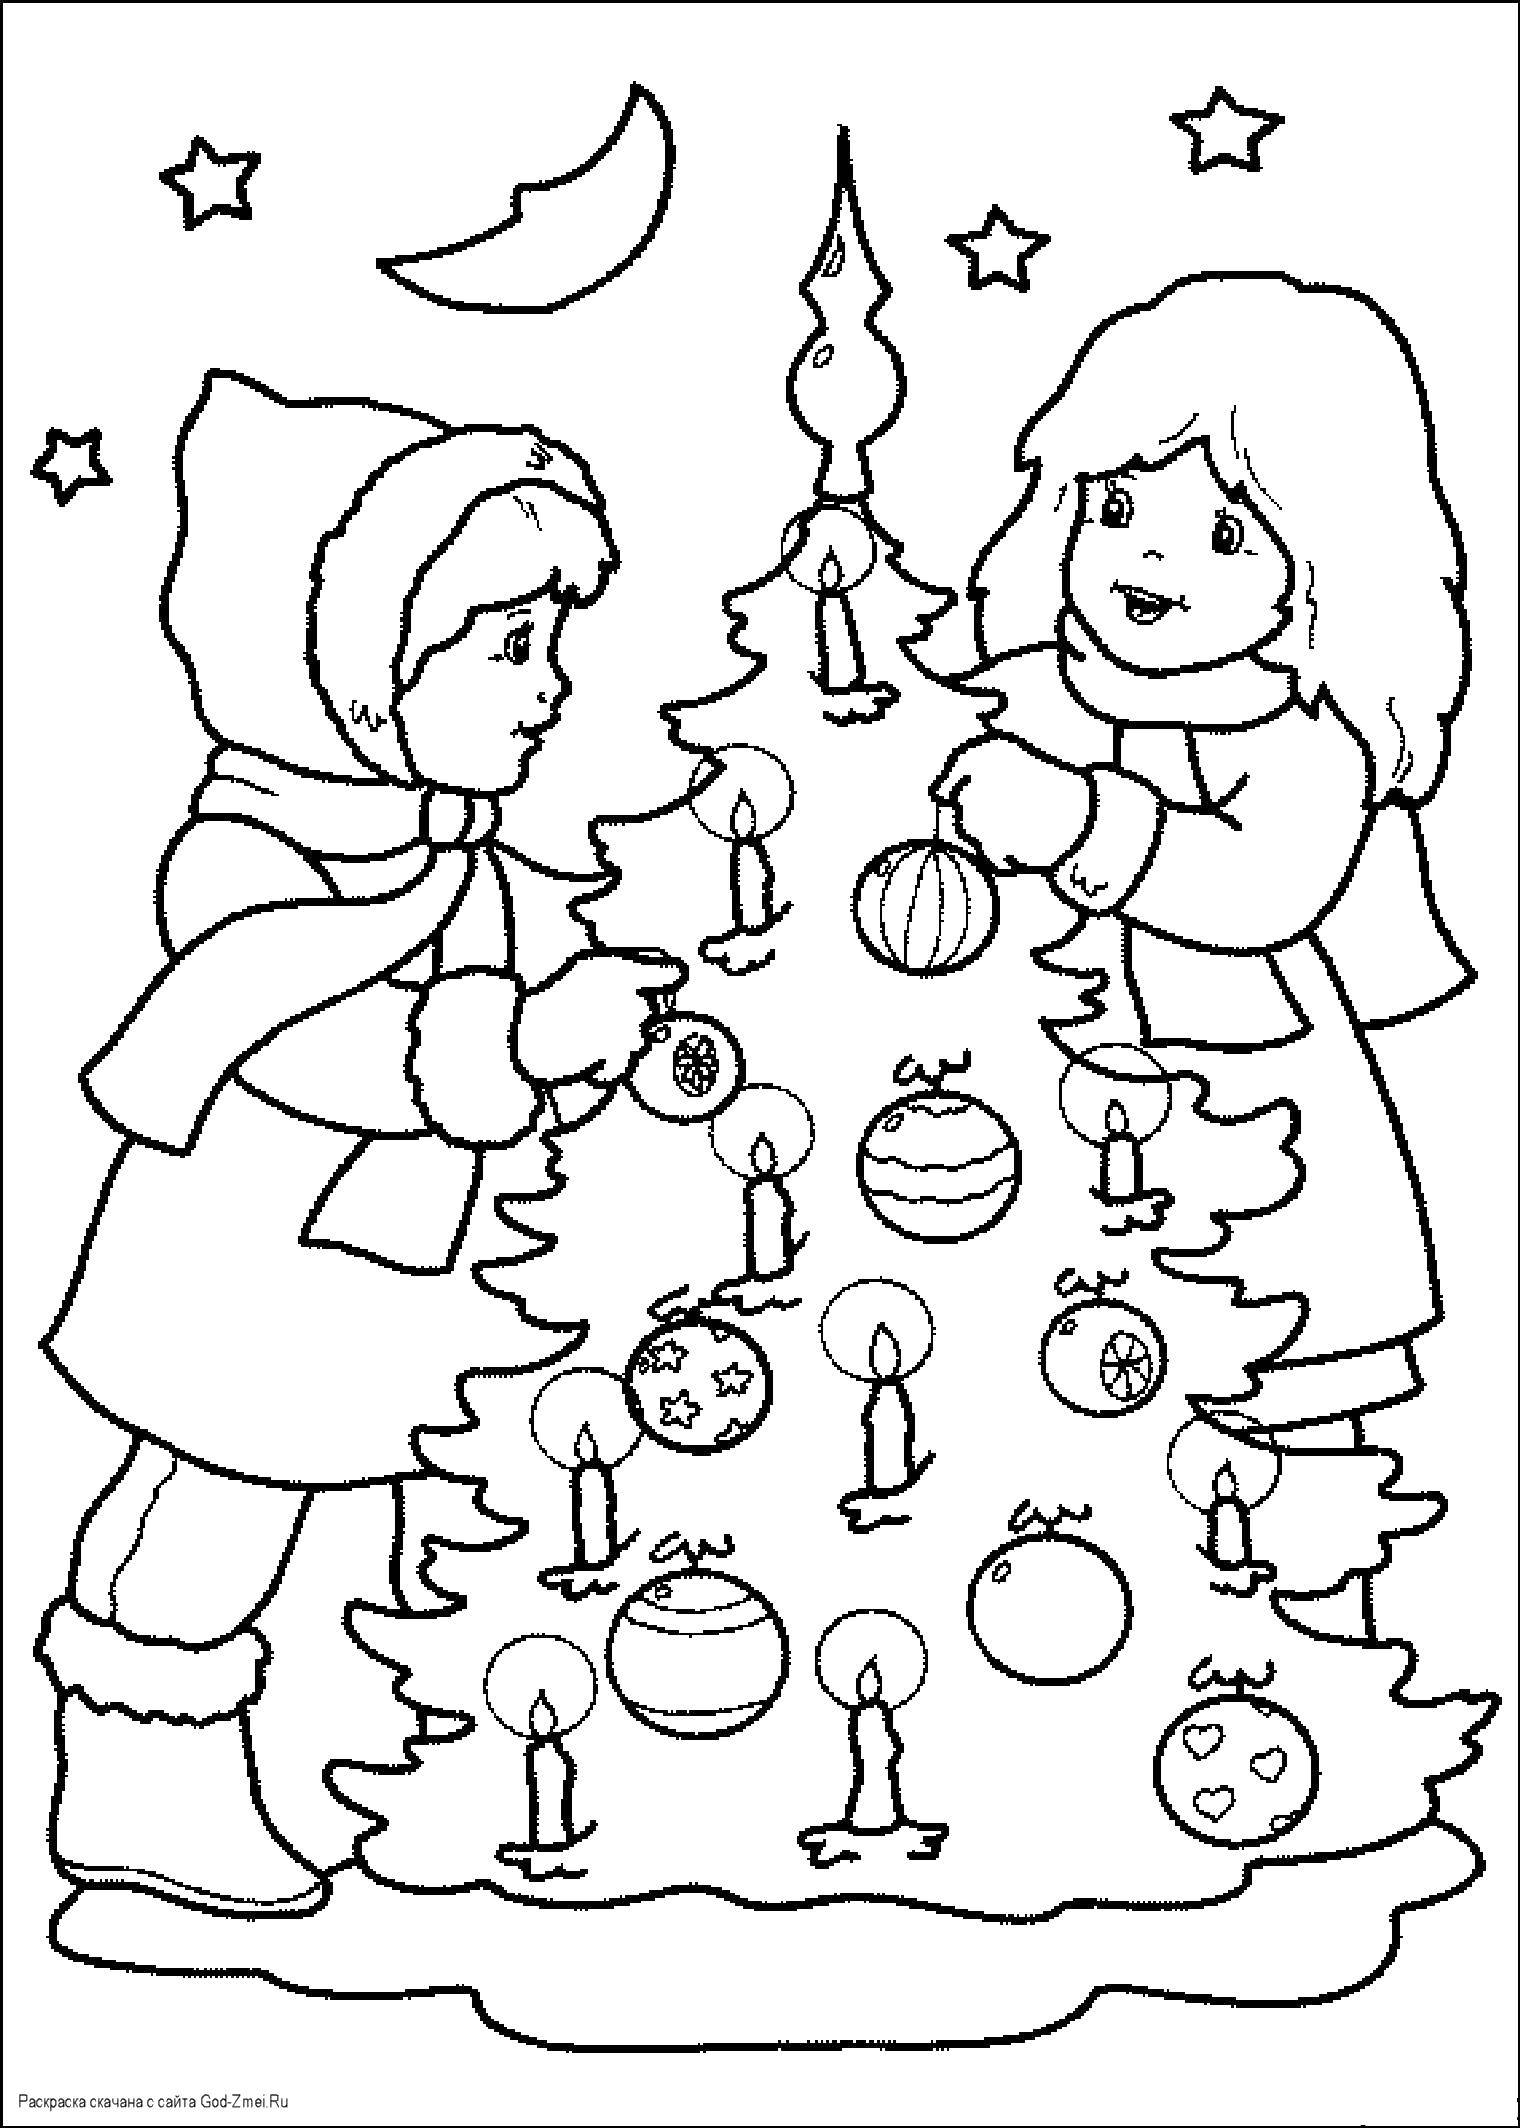 Coloring Kids decorate the Christmas tree. Category Christmas. Tags:  Christmas, Christmas toy, Christmas tree, gifts.